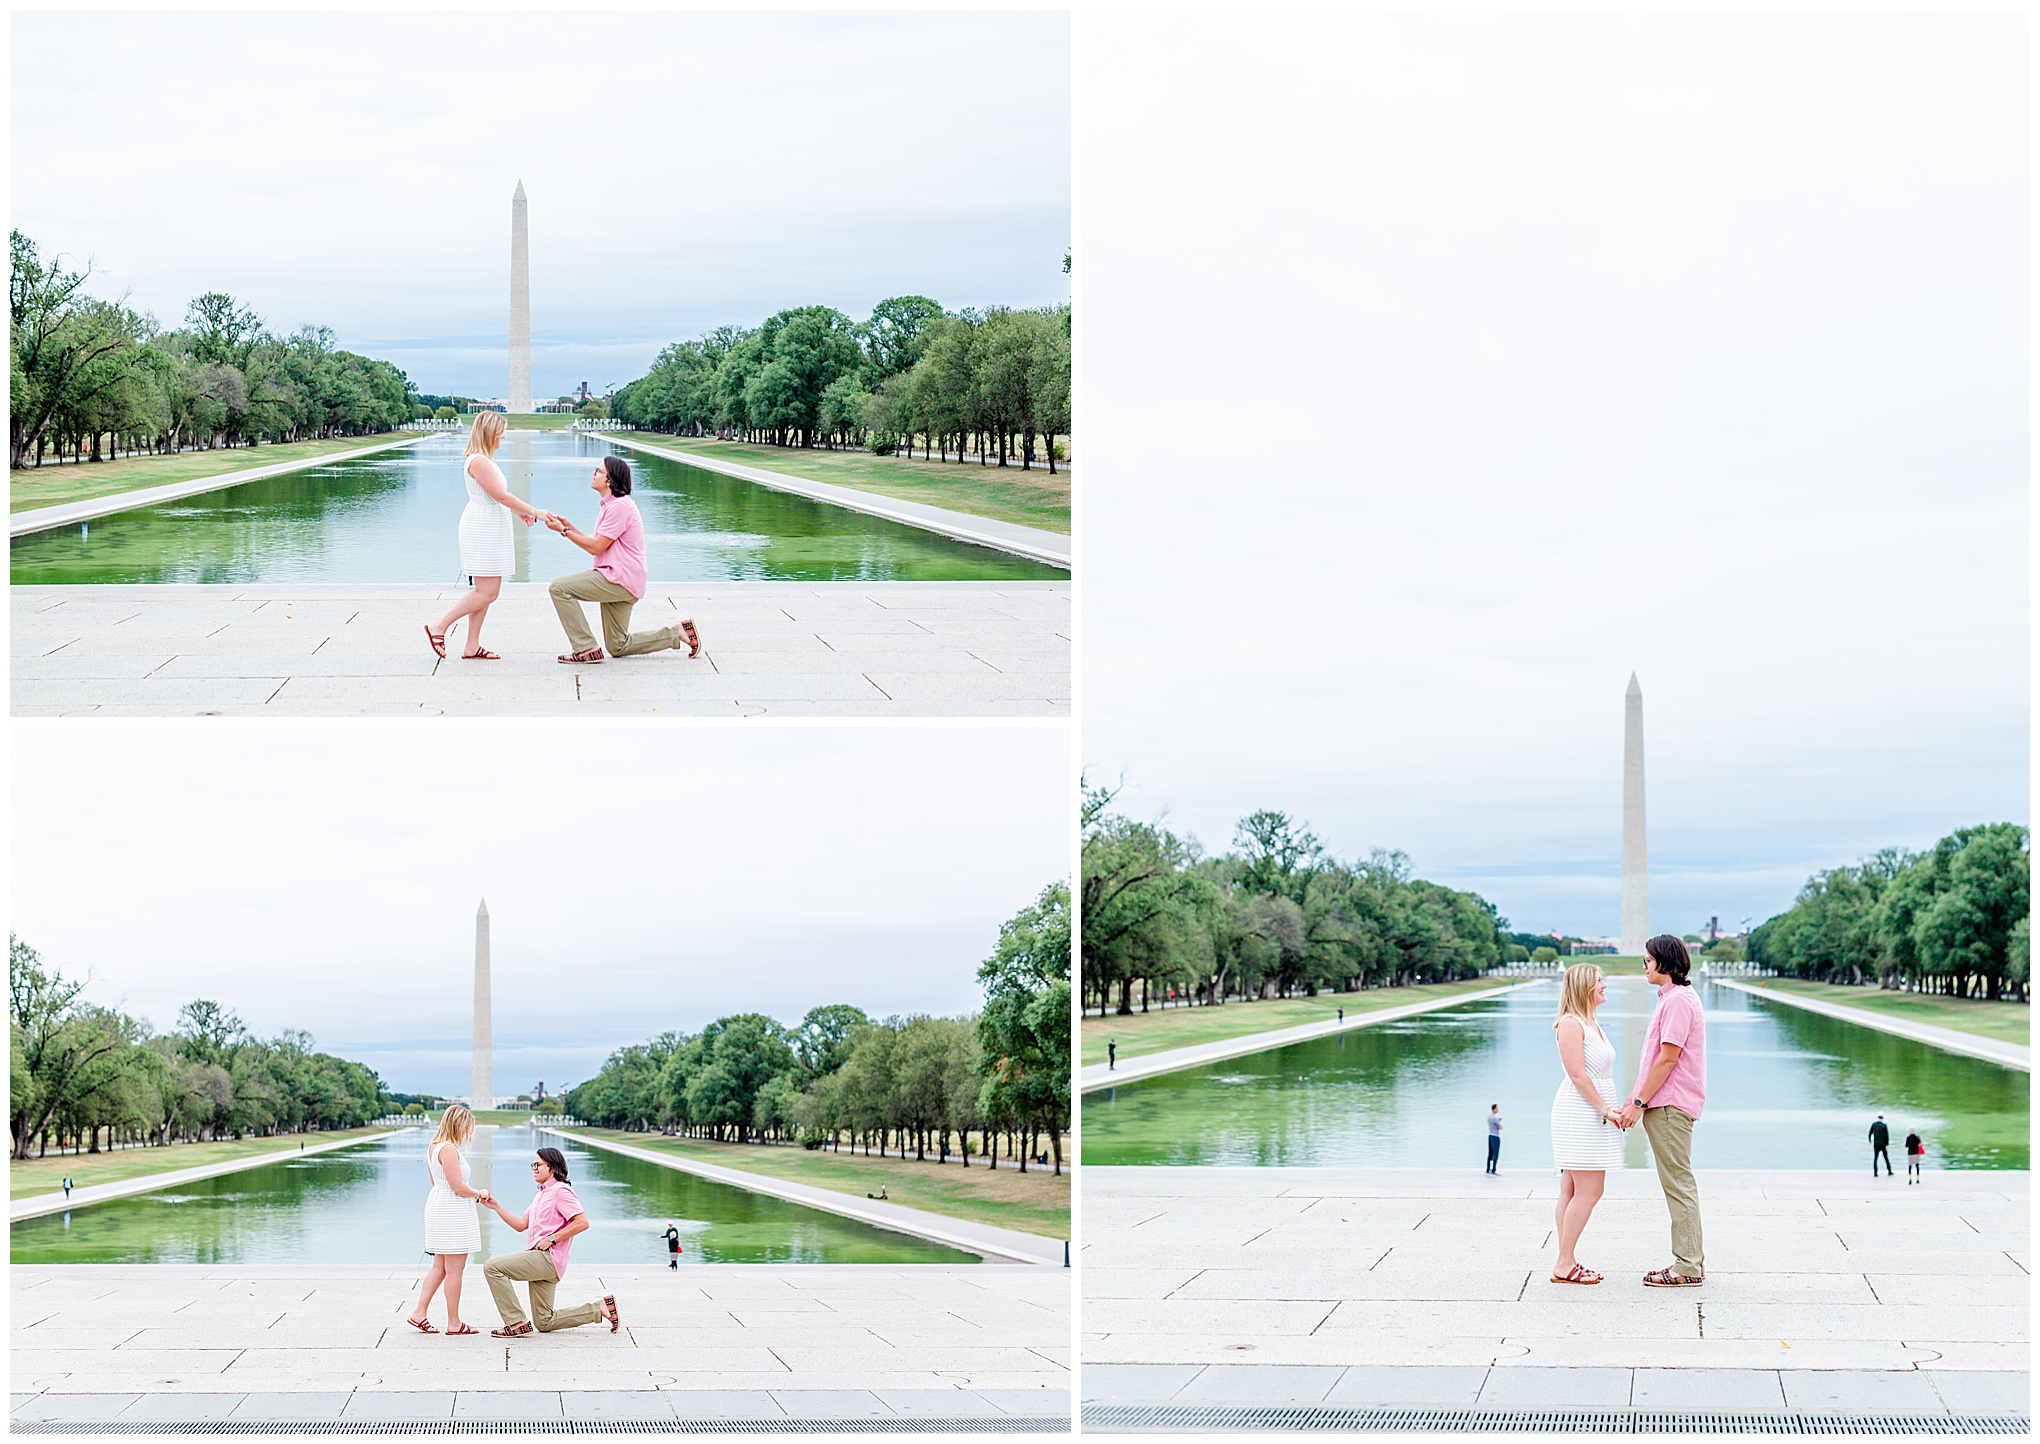 Lincoln Memorial suprise proposal, National Mall proposal, reflecting pool, Lincoln Memorial portraits, National Mall portraits, engagement photos, proposal portraits, surprise proposal photos, Rachel E.H. Photography, D.C. portraits, Virginia wedding photographer, Maryland wedding photographer, Baltimore wedding photographer, D.C. wedding photographer, marriage proposal